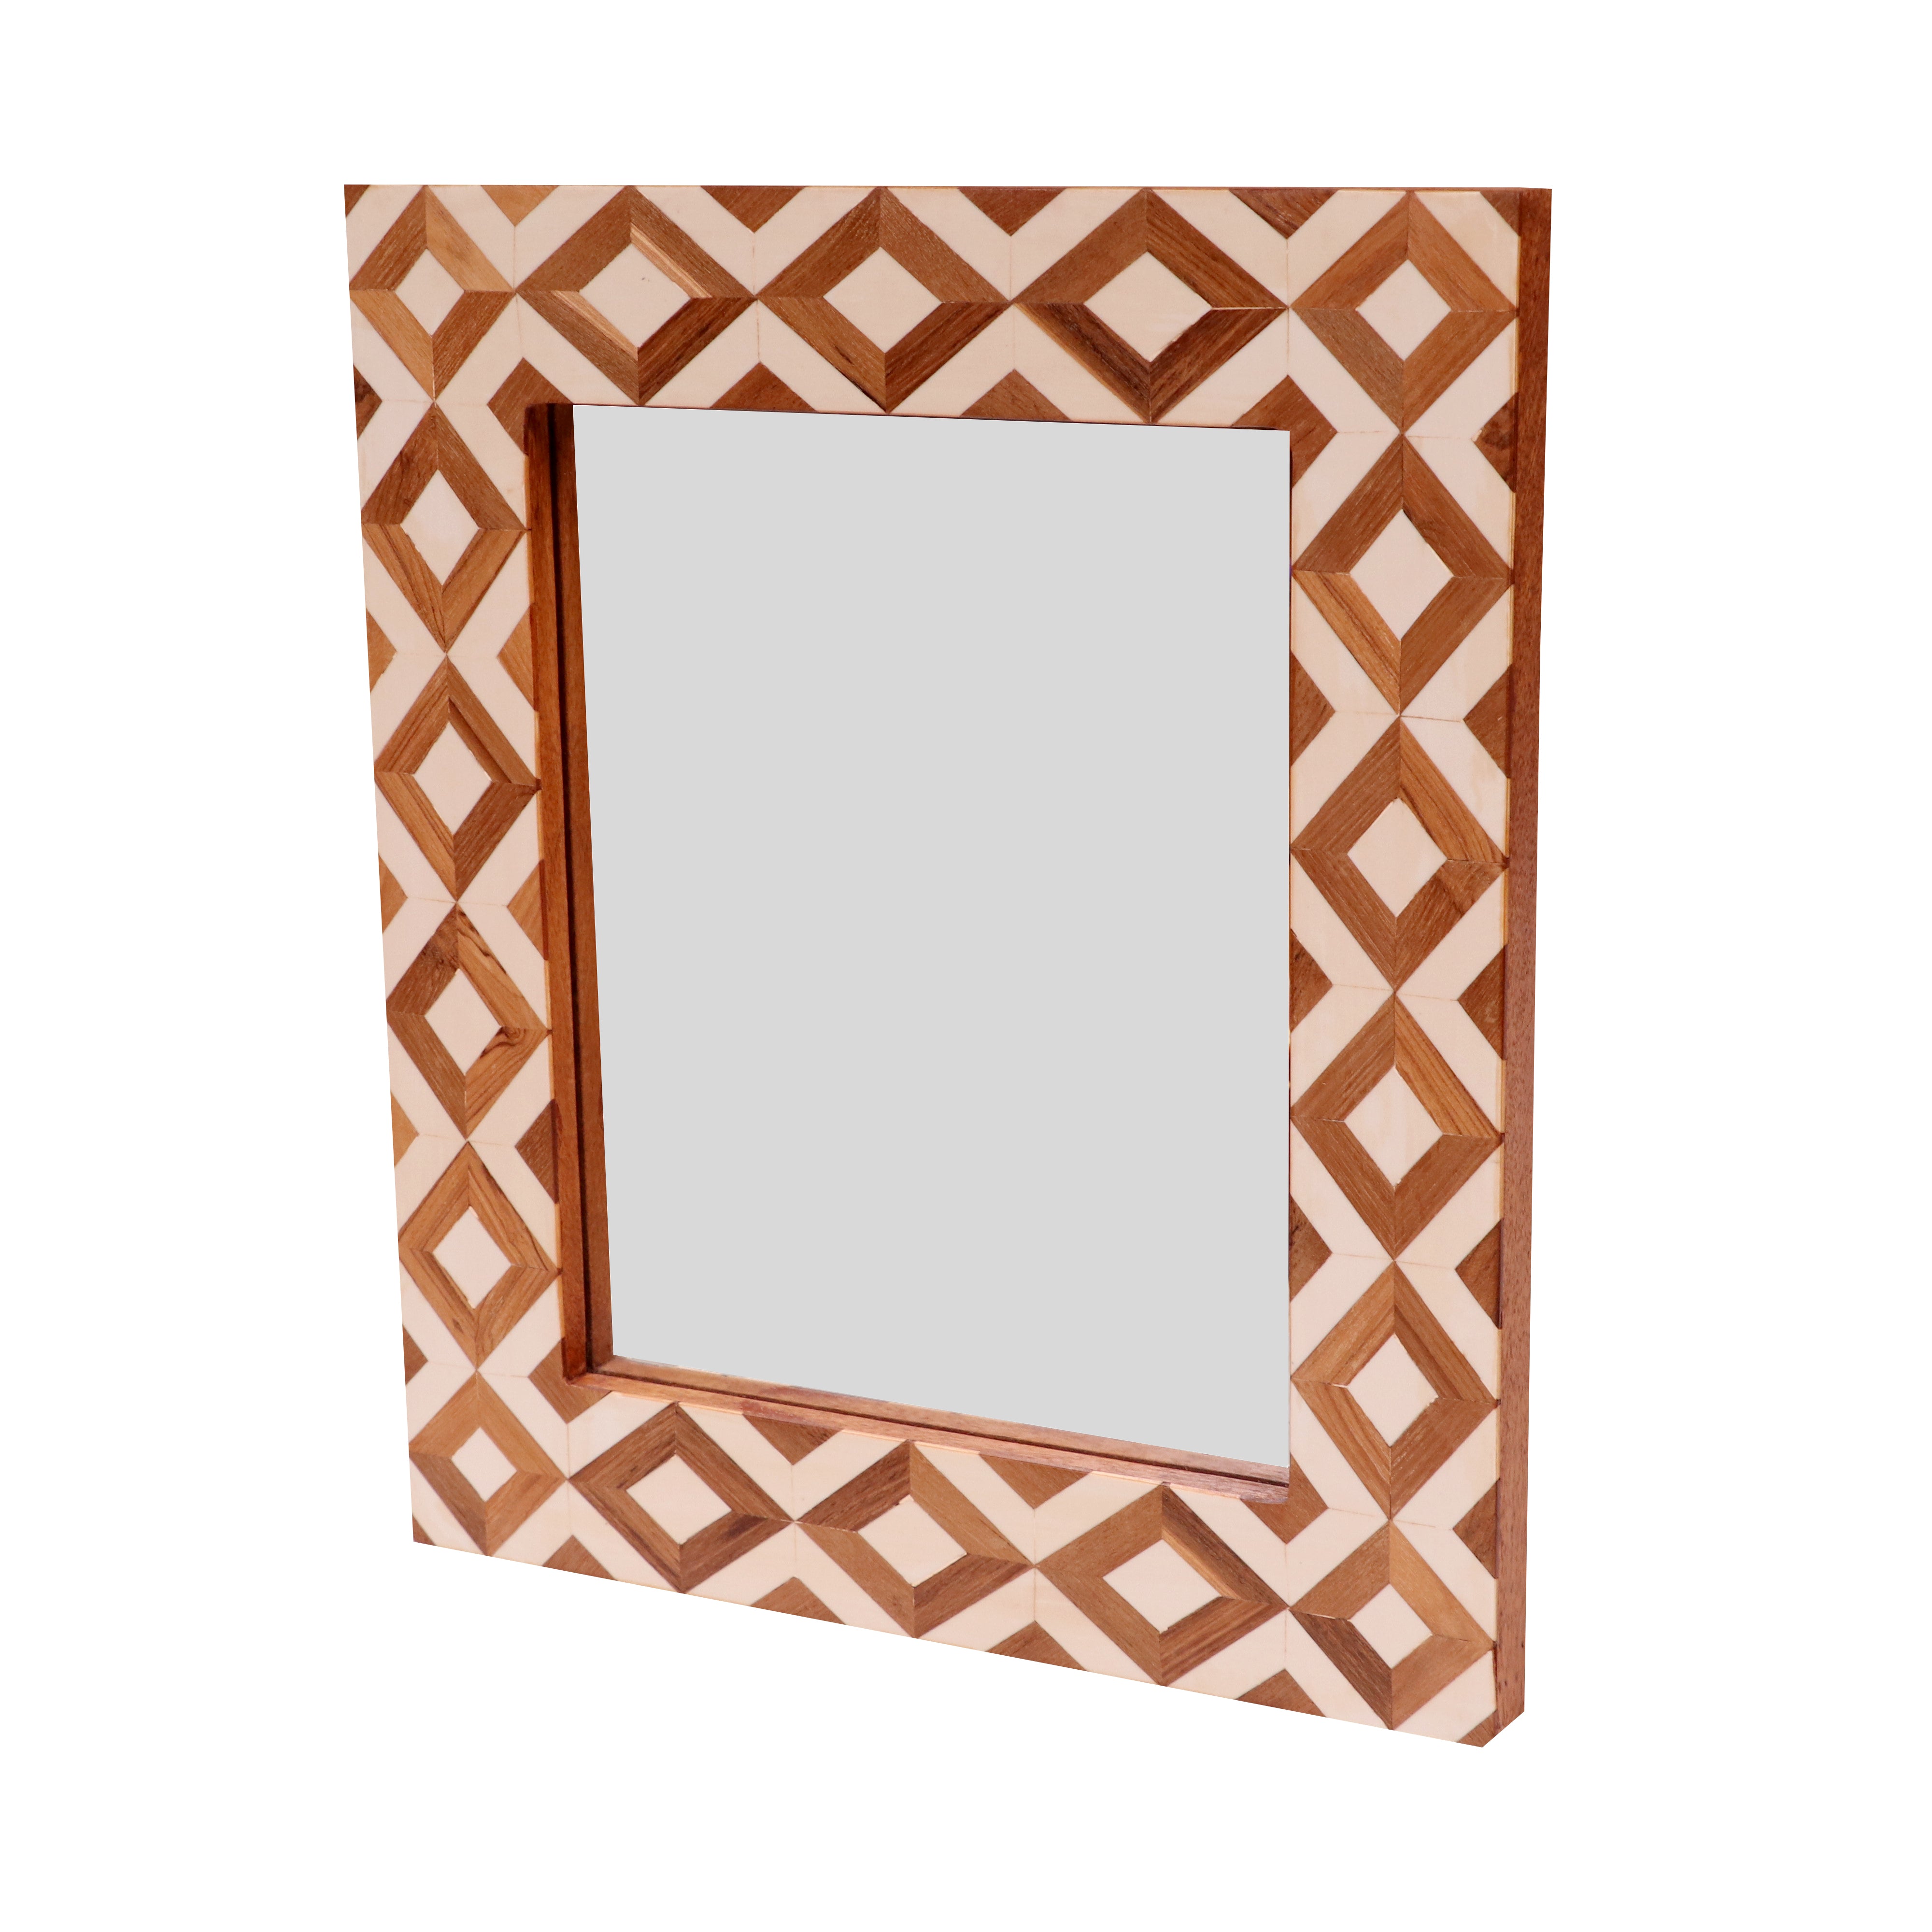 Classic Aesthetic Wooden Diamond Style Handmade Large Border Mirror for Home Mirror